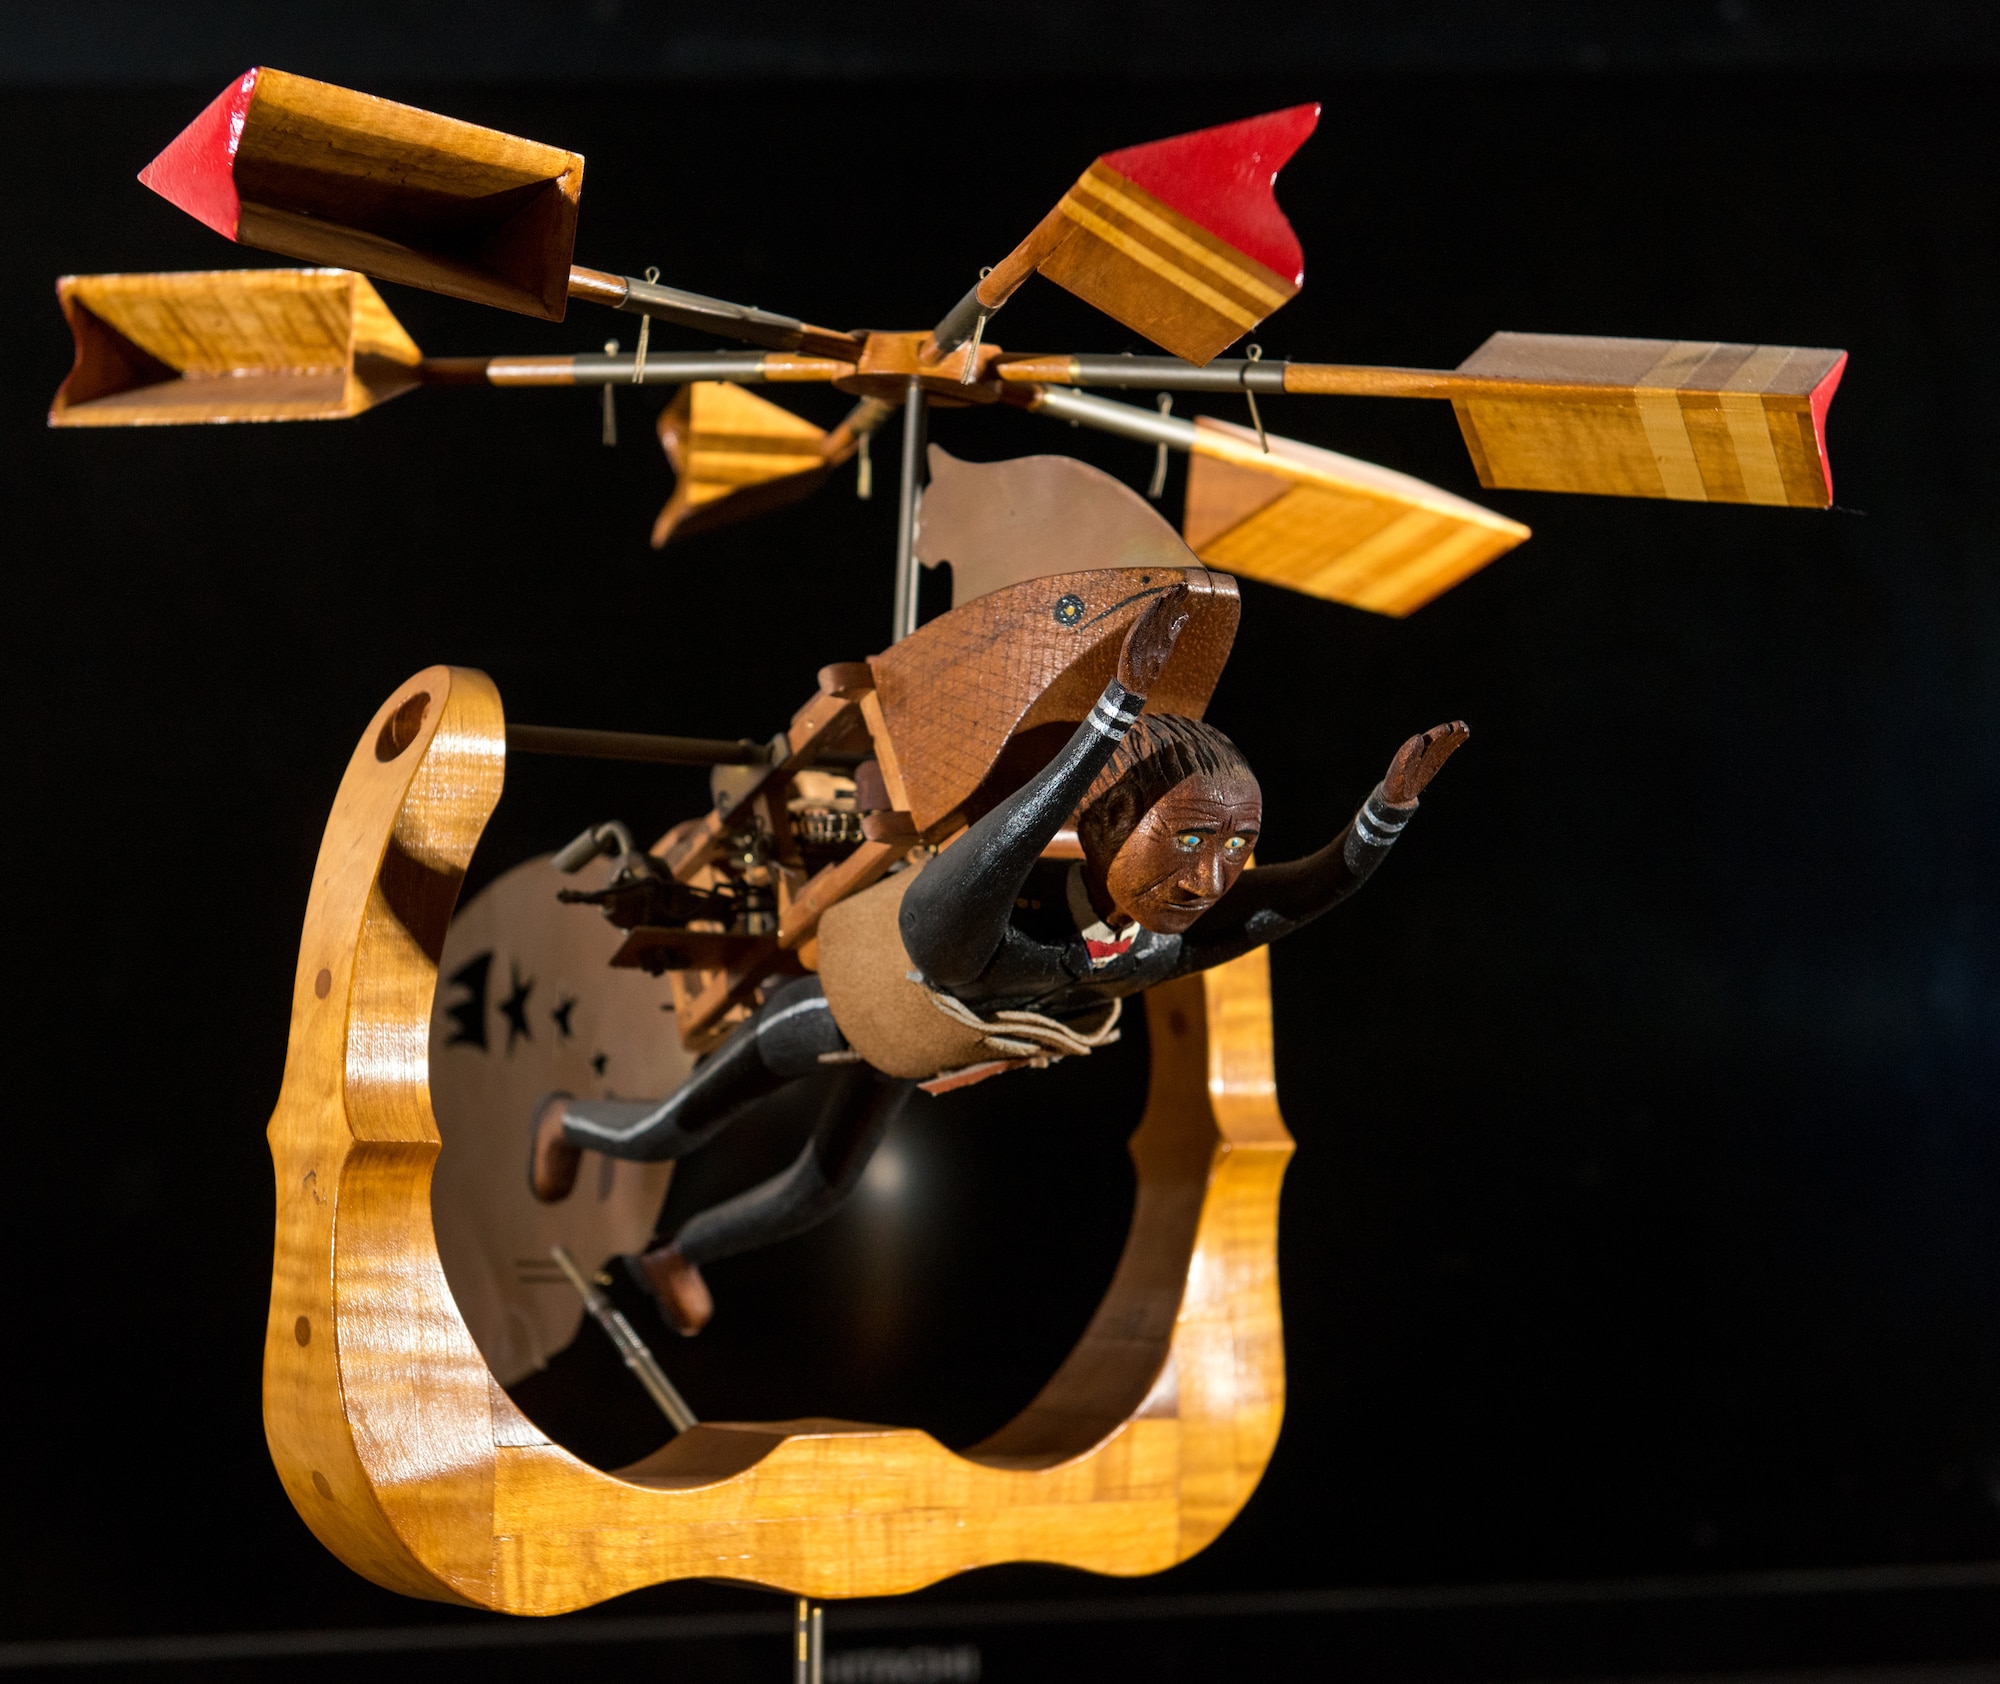 A wind driven mechanical folk art creation by retired U.S. Air Force Master Sgt. Daniel Holmes, rests on a shelf at his home in Lowell, Mass., Jun. 1, 2018. Holmes utilizes his art to teach Airmen various electronic and mechanical skills not taught during their technical training in order for them to maintain 1960's era technology used  at the Sagamore Hill Solar Observatory of the 2nd Weather Squadron, Det. 2, in Hamilton, Mass. (U.S. Air Force photo by J.M. Eddins Jr.)